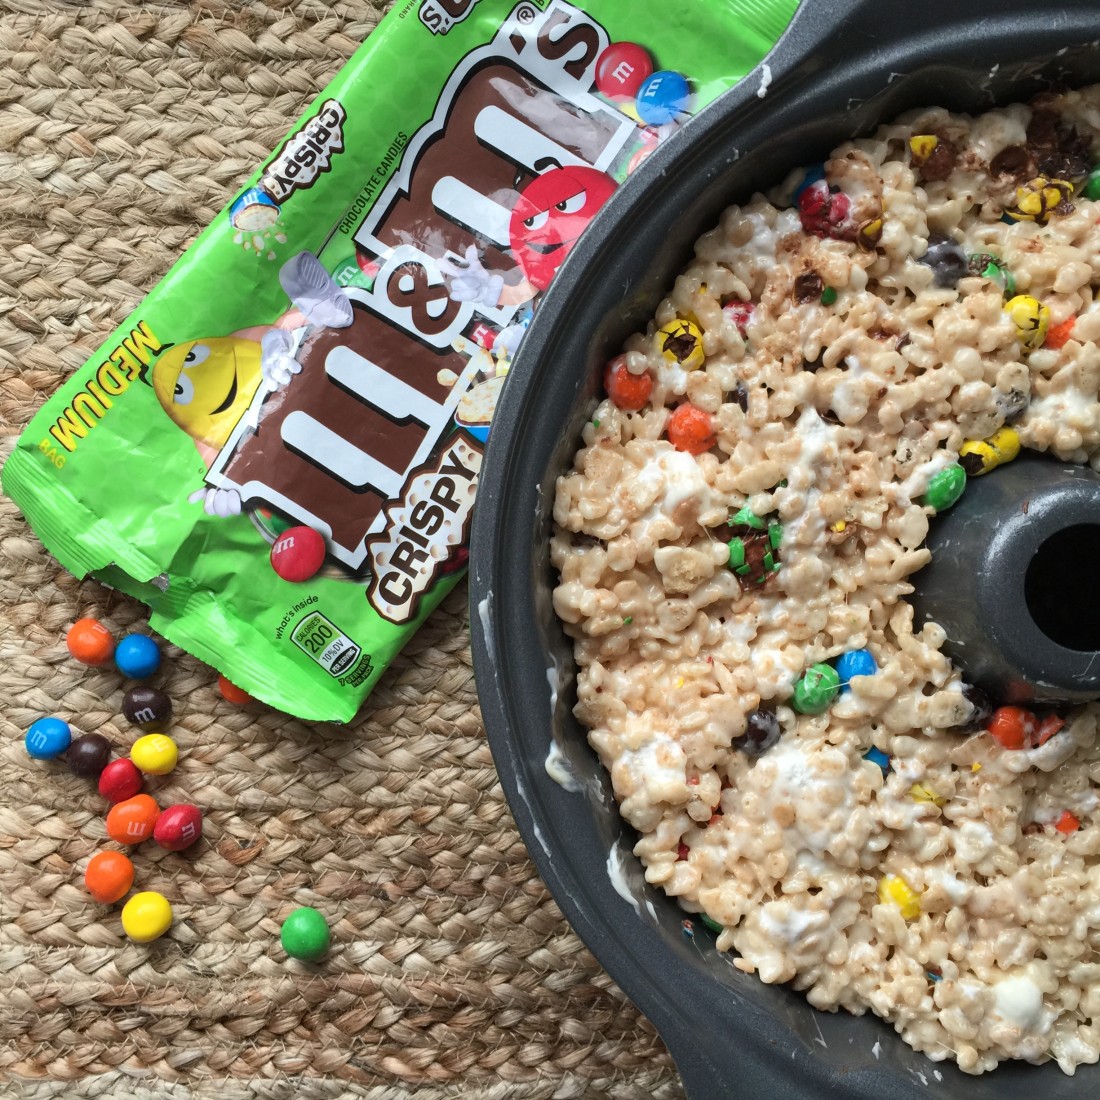 Crispy is Back With This M&M's® Crispy Cake Recipe! - Roasted Beanz